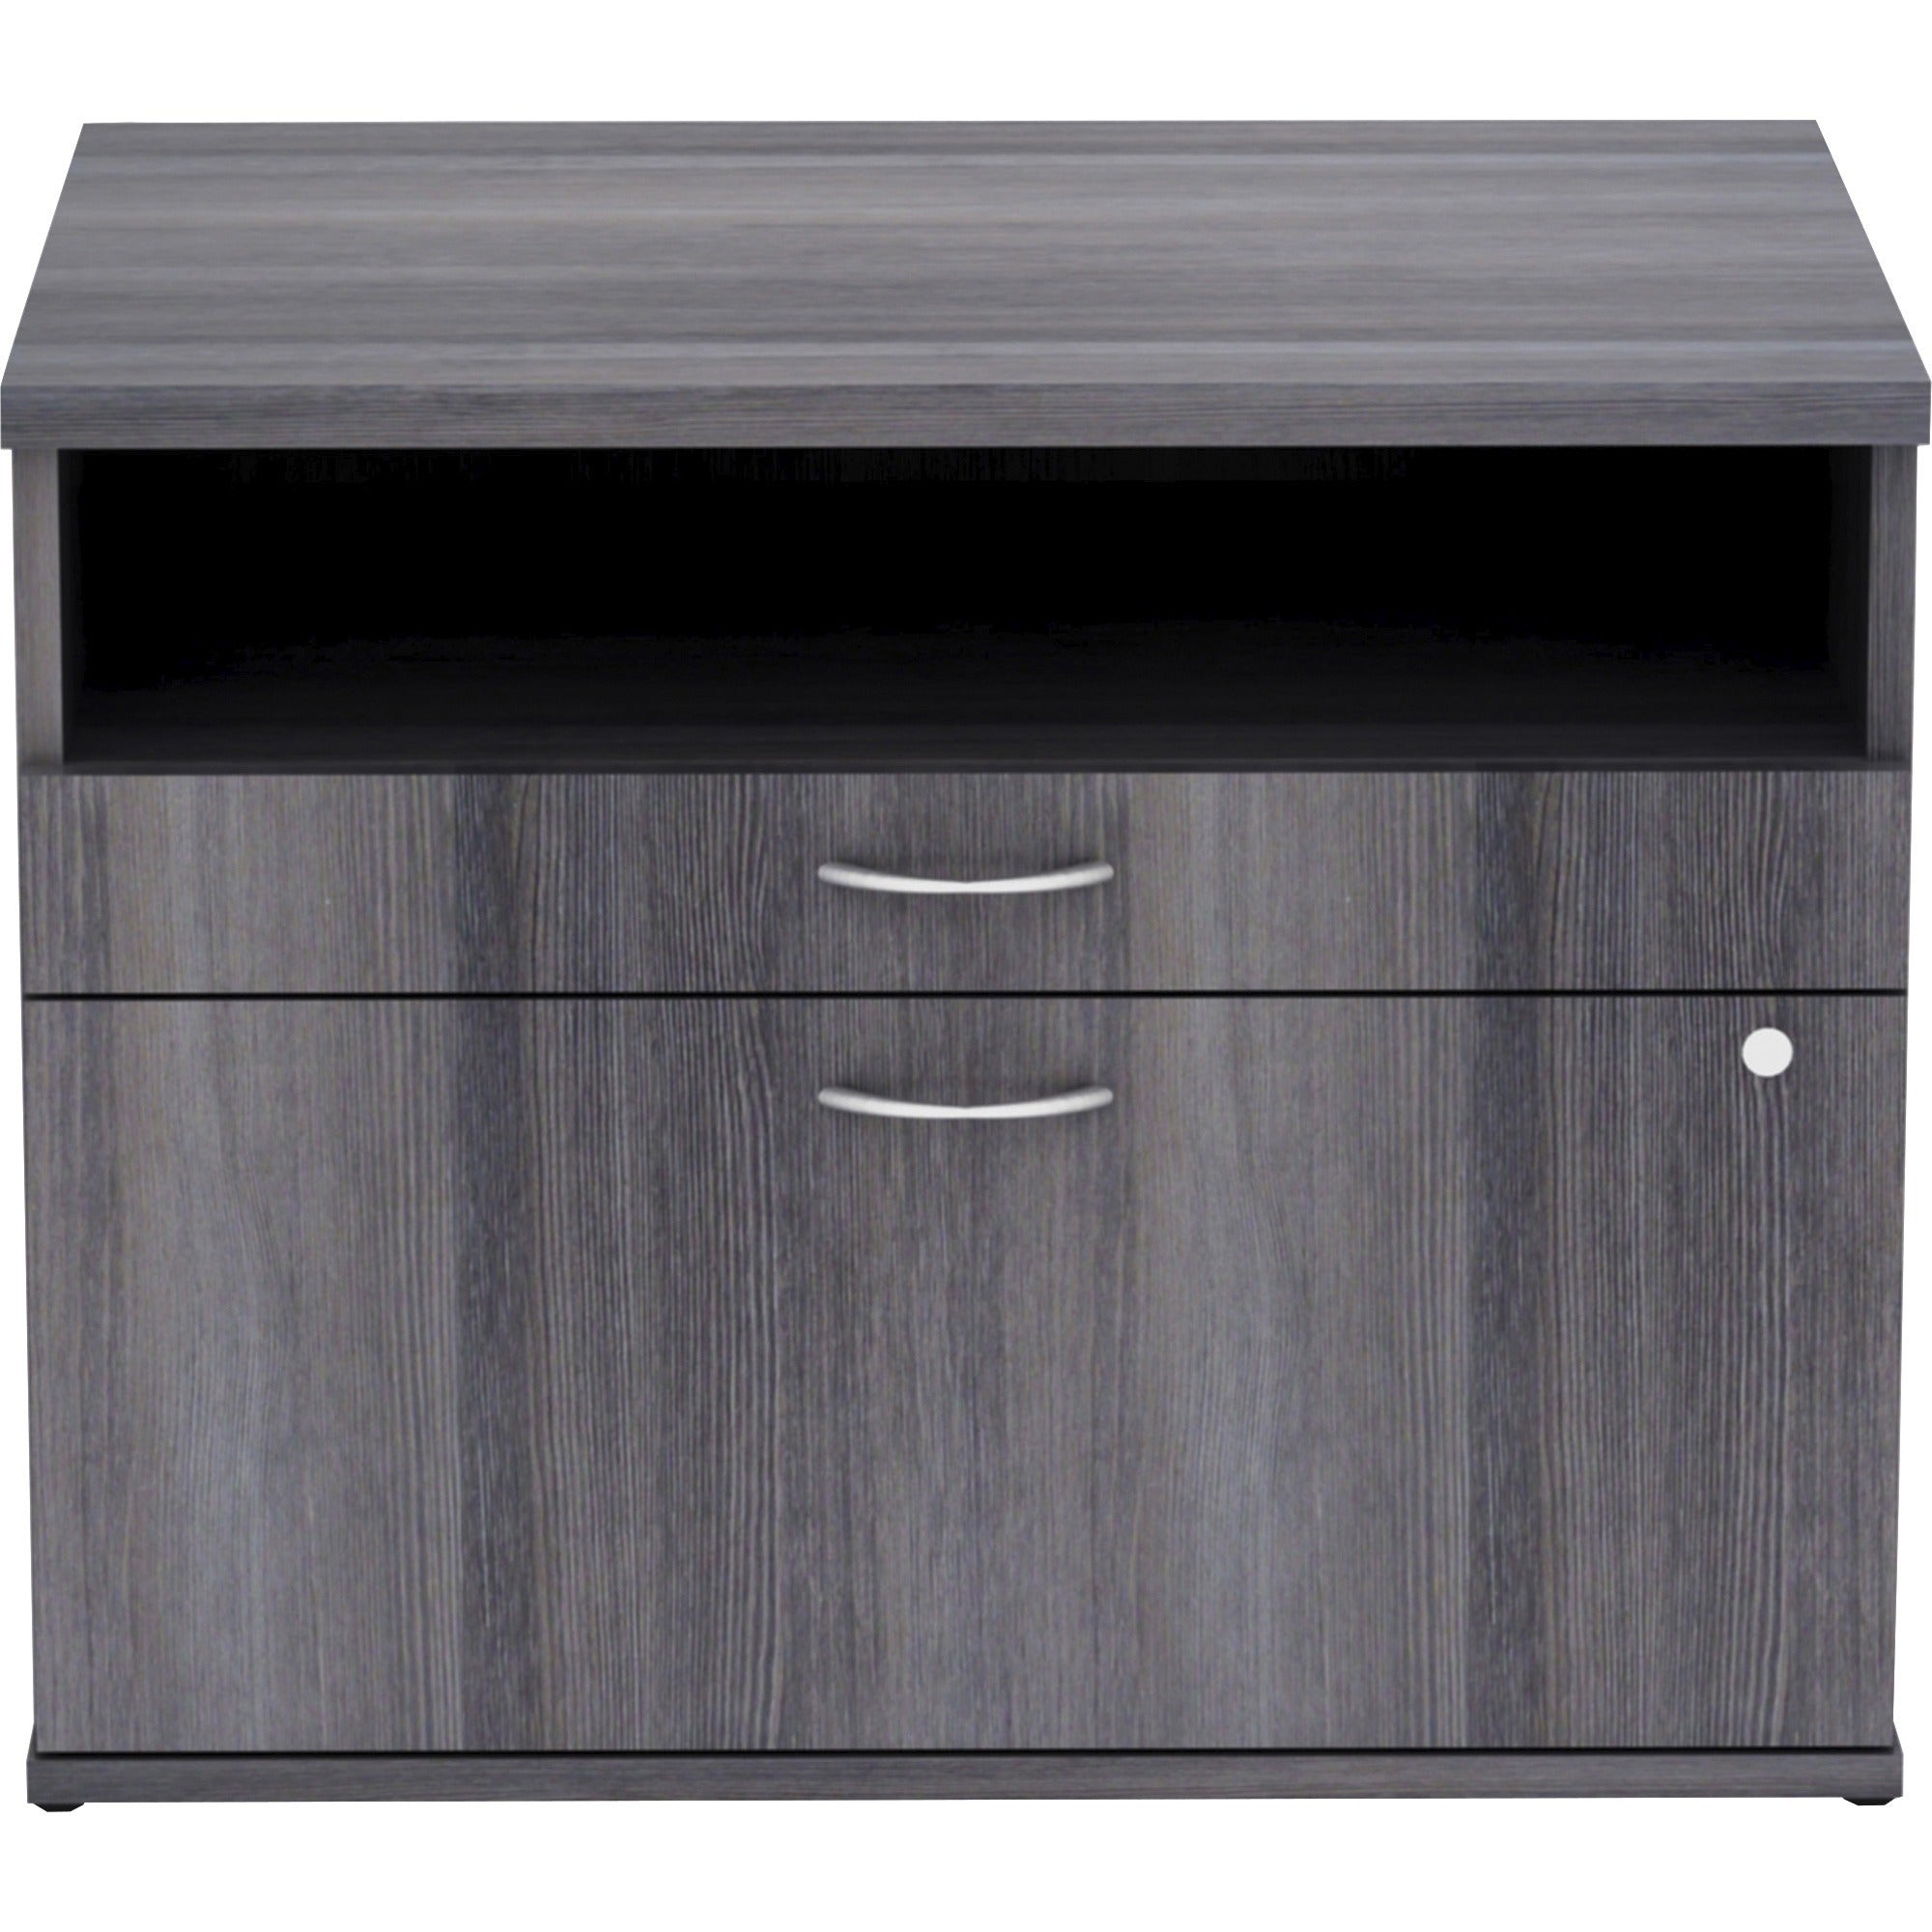 lorell-relevance-series-2-drawer-file-cabinet-credenza-w-open-shelf-295-x-22231-2-x-file-drawers-1-shelves-finish-charcoal-laminate_llr16213 - 2